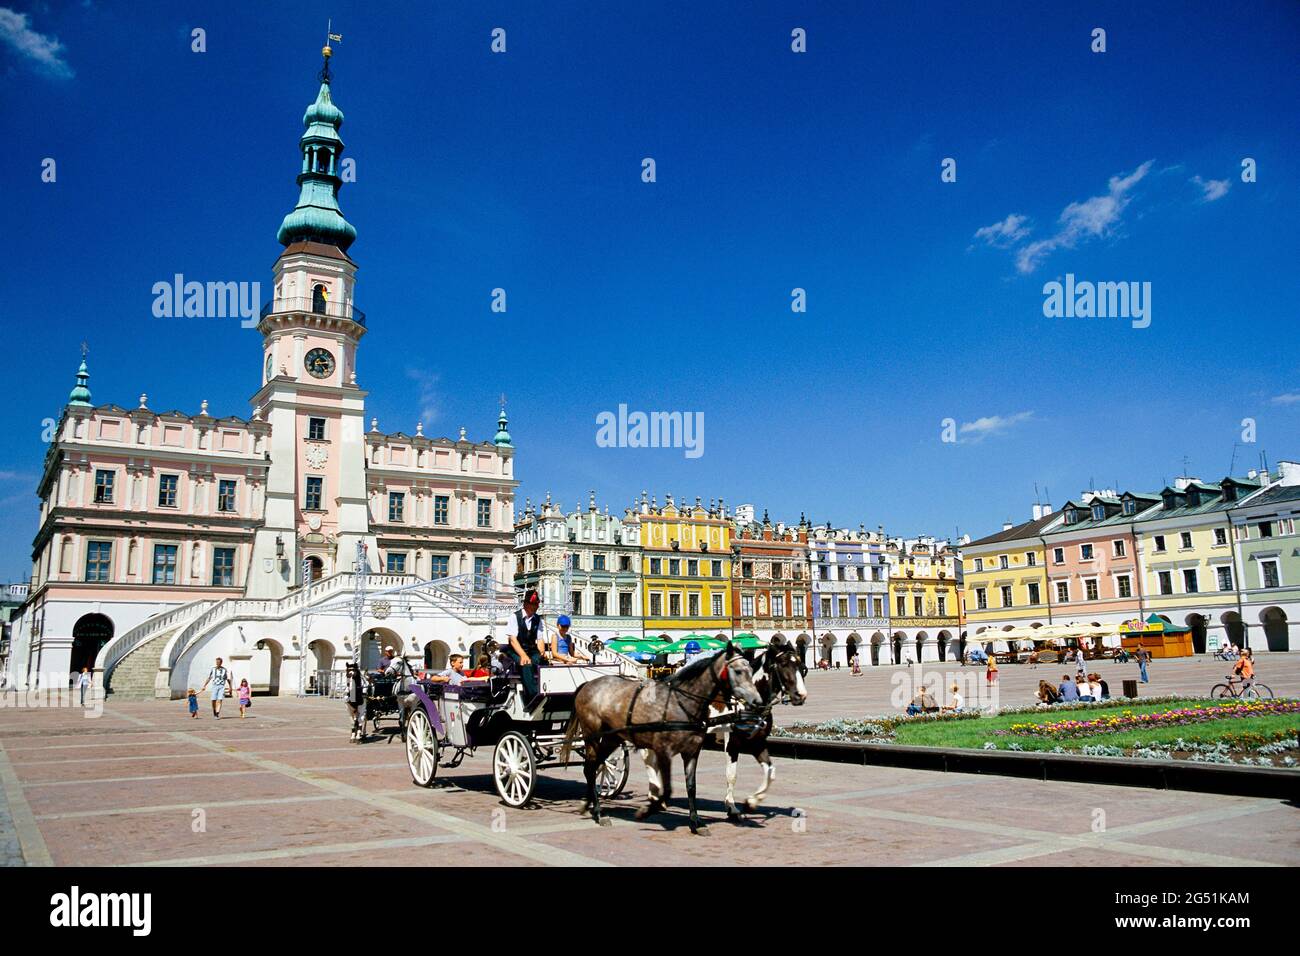 Town Hall and the Great Market Square, Zamosc, Lublin Voivodeship, Poland Stock Photo